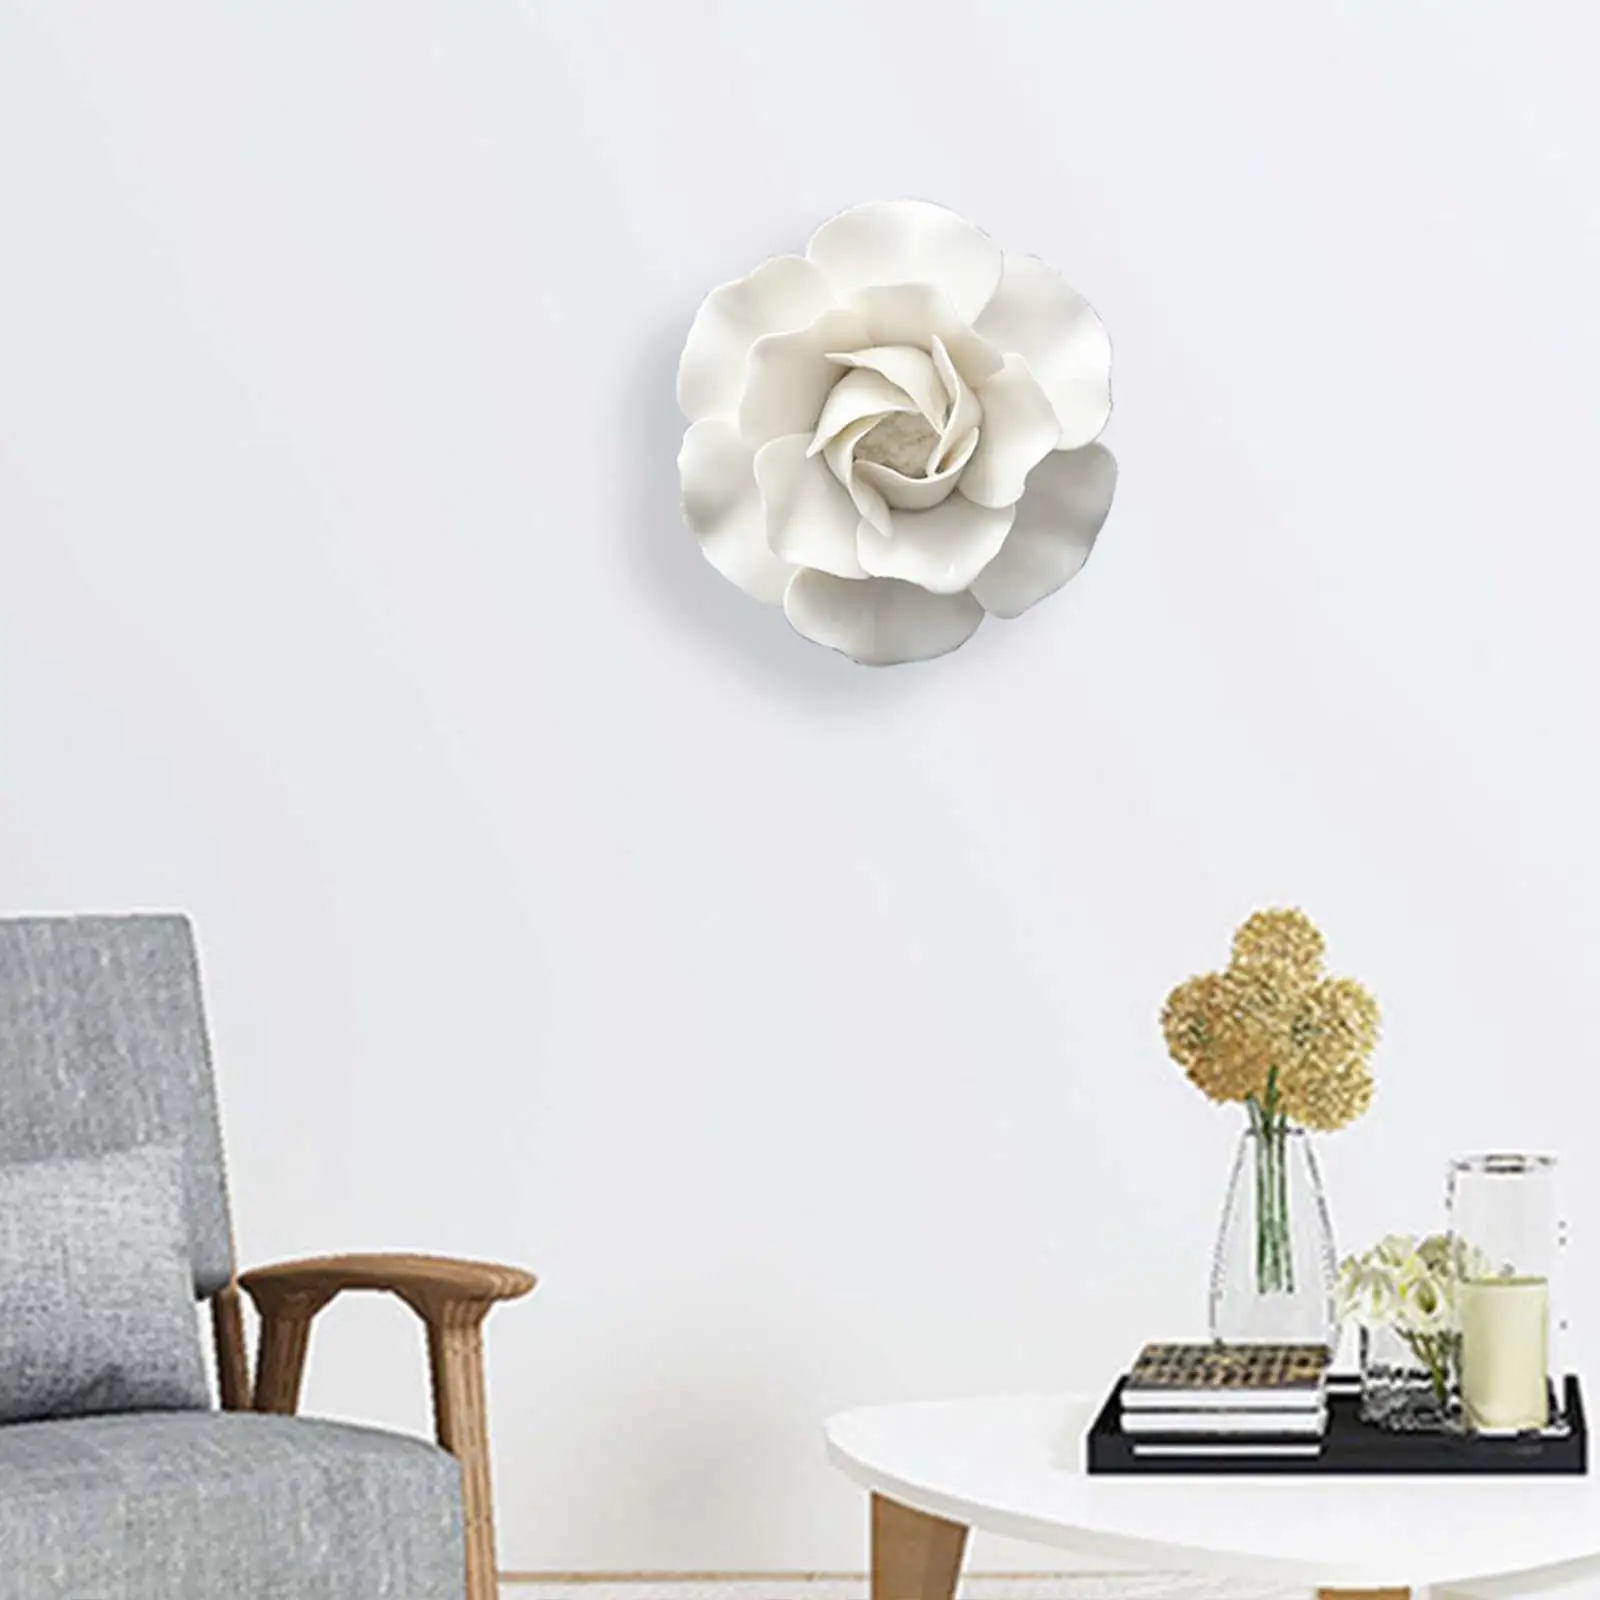 Hanging Wall 3D Ceramic Flower Wall Decor Flower Wall Decor Creative Artificial Artificial Flower for Bathroom Office Dining